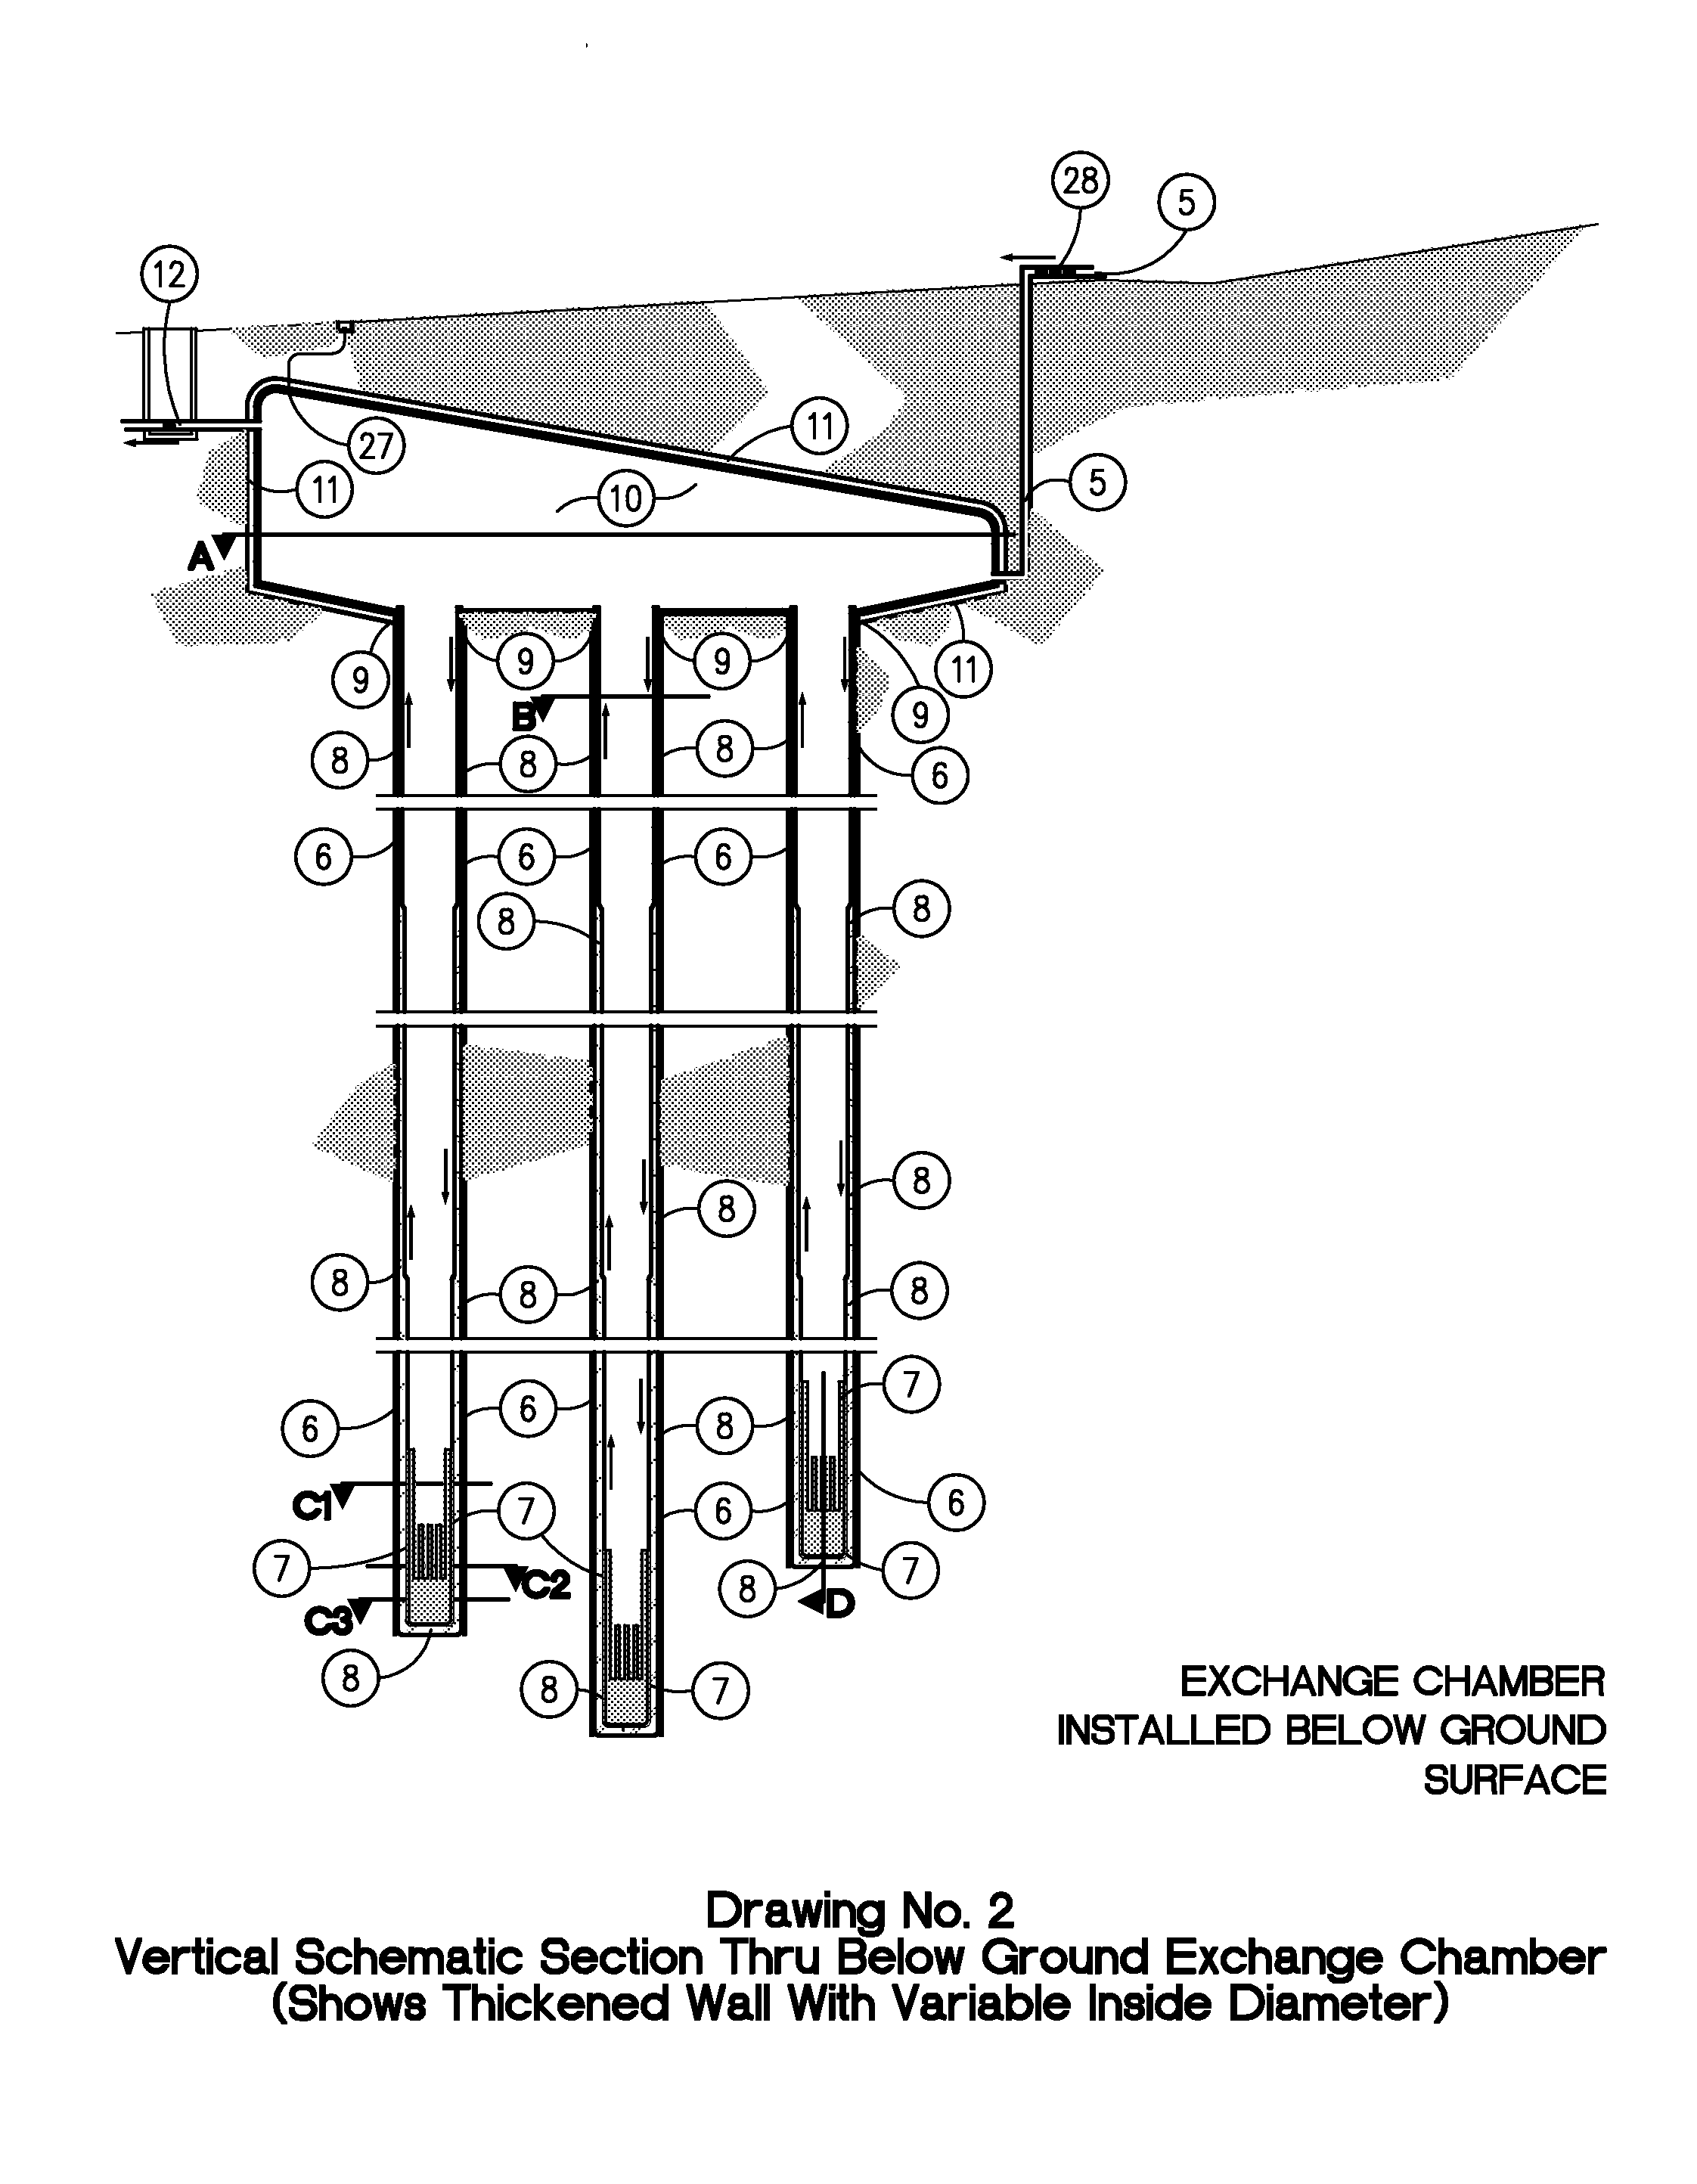 Geothermal electricity production methods and geothermal energy collection systems